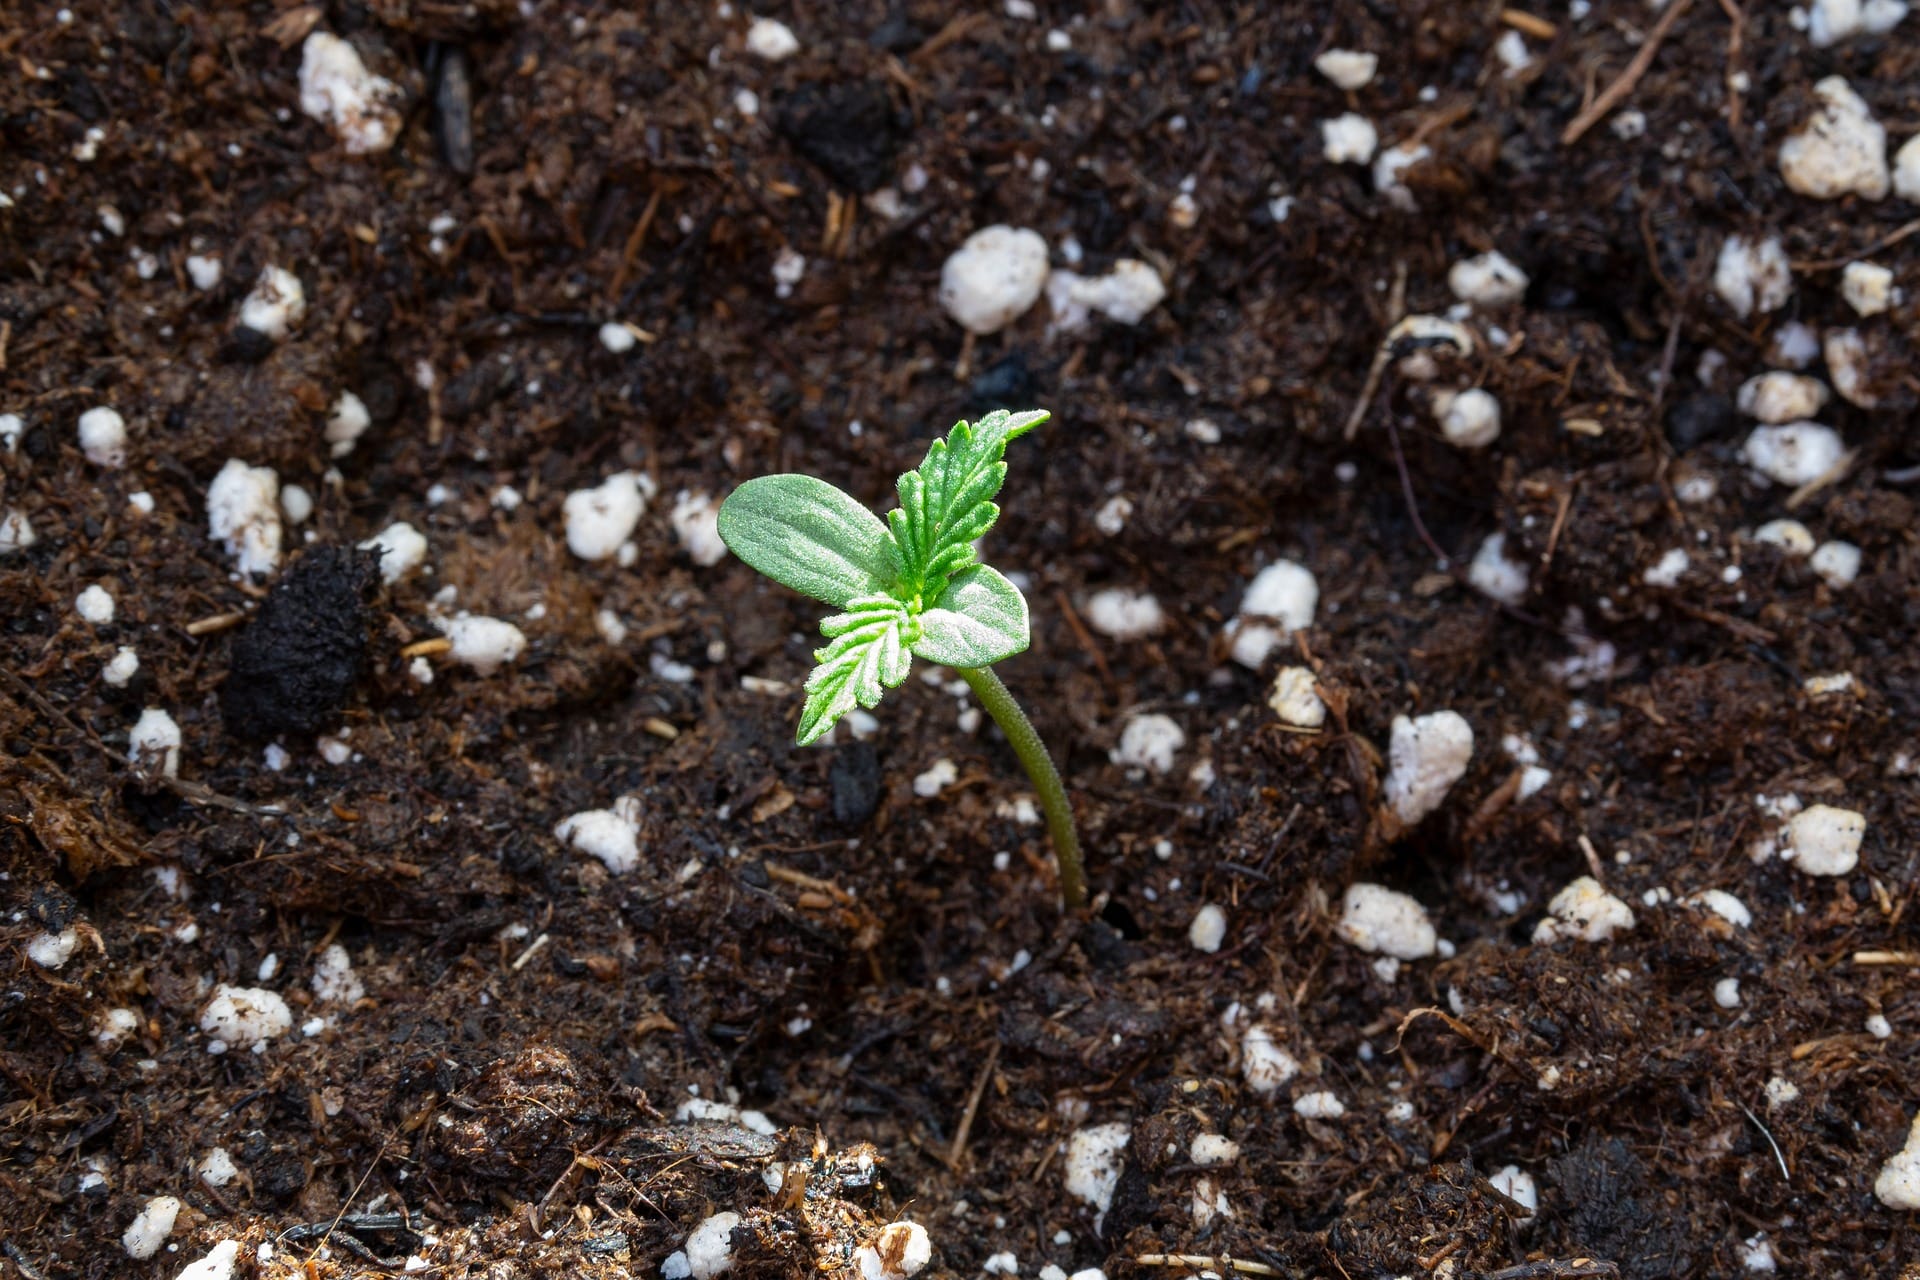 Leggy cannabis seedlings taking root in nutrient-rich soil, with visible soil particles clinging to the expanding root structure.